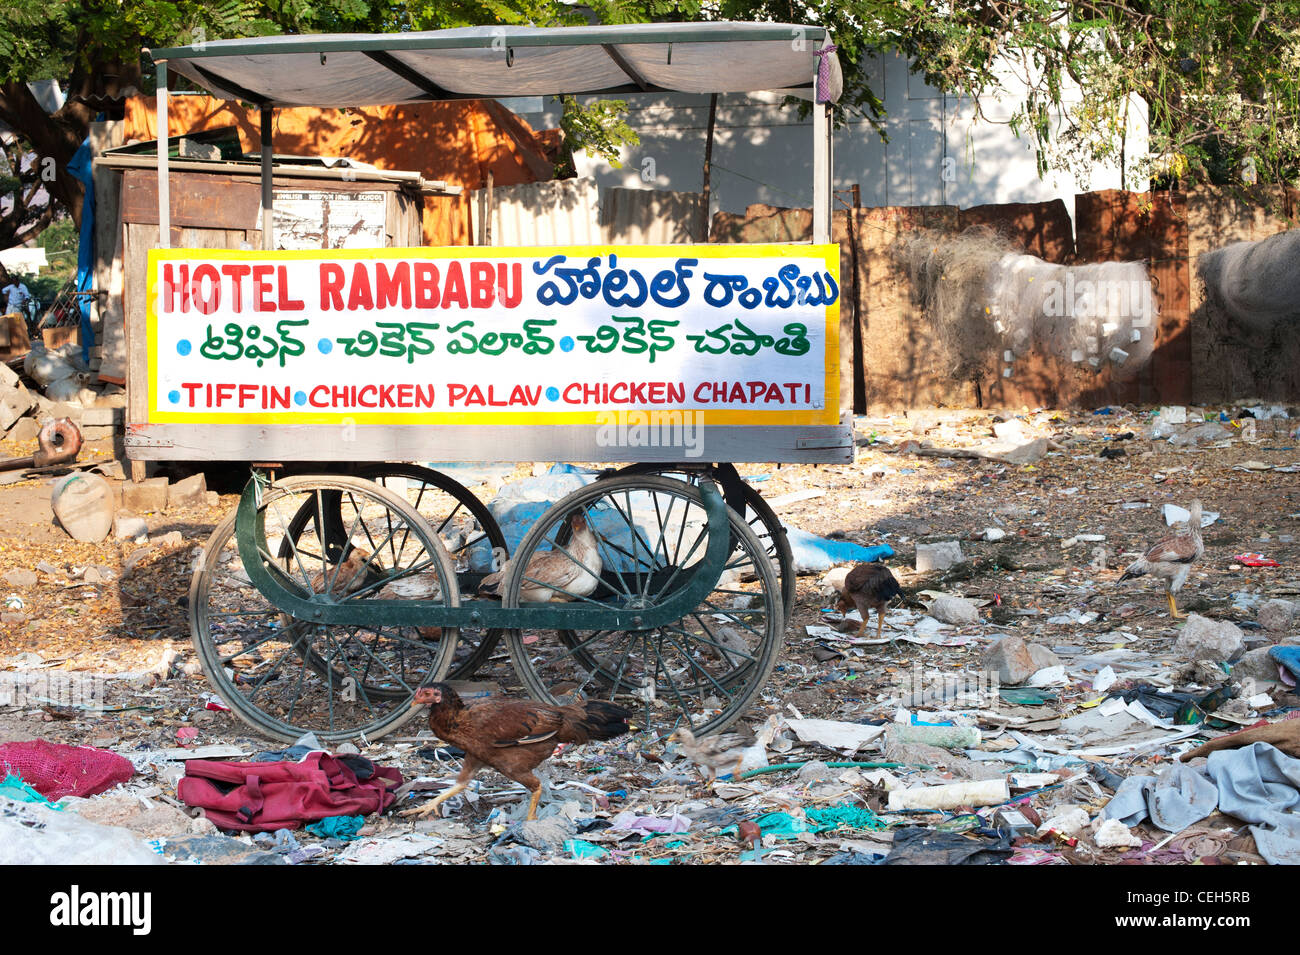 Indian food cart in the middle of a rubbish tip surround by chickens. Andhra Pradesh, India Stock Photo